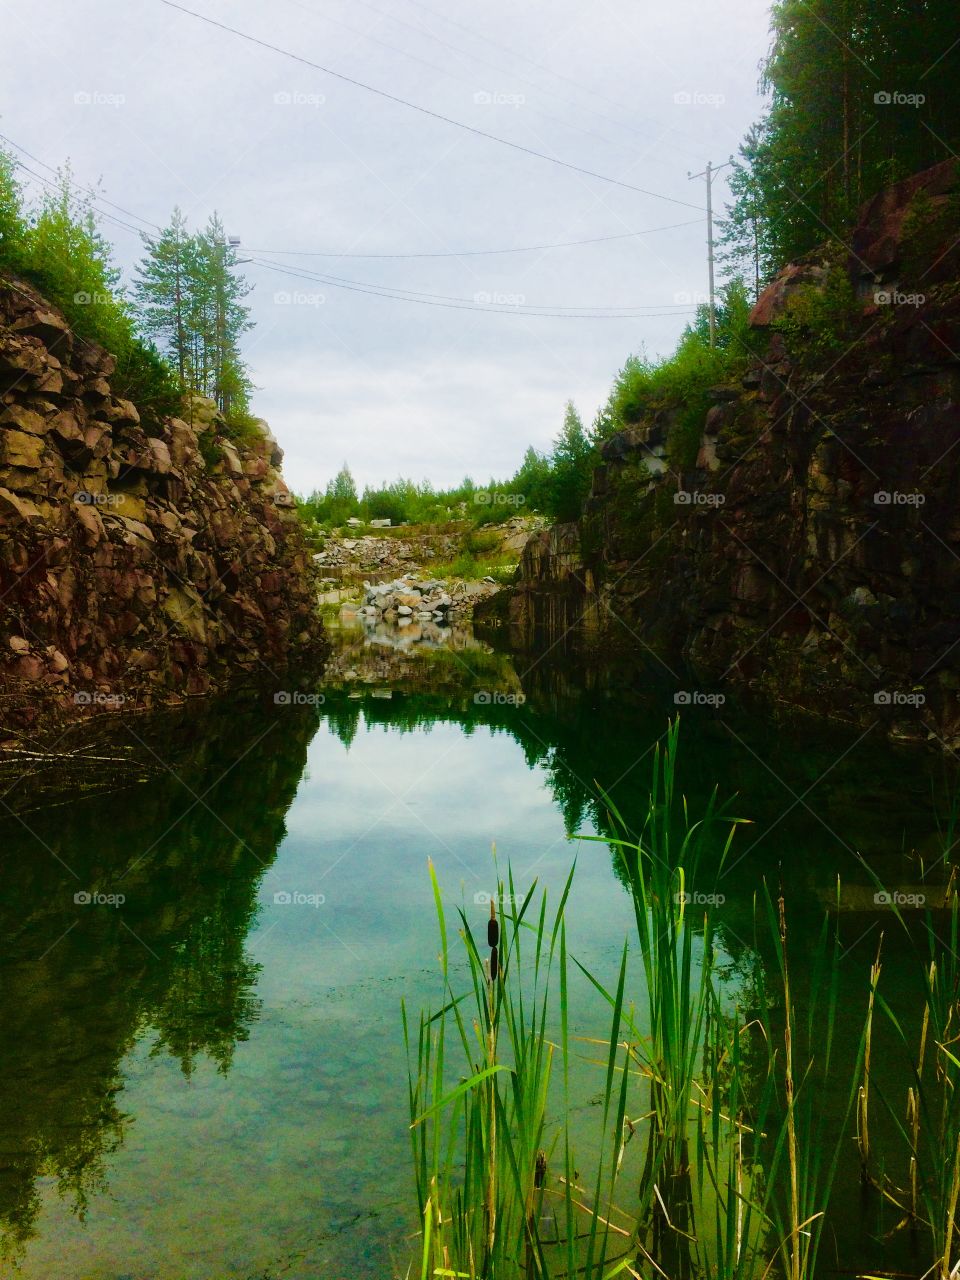 An abandoned stone quarry filled with Green water in Finland